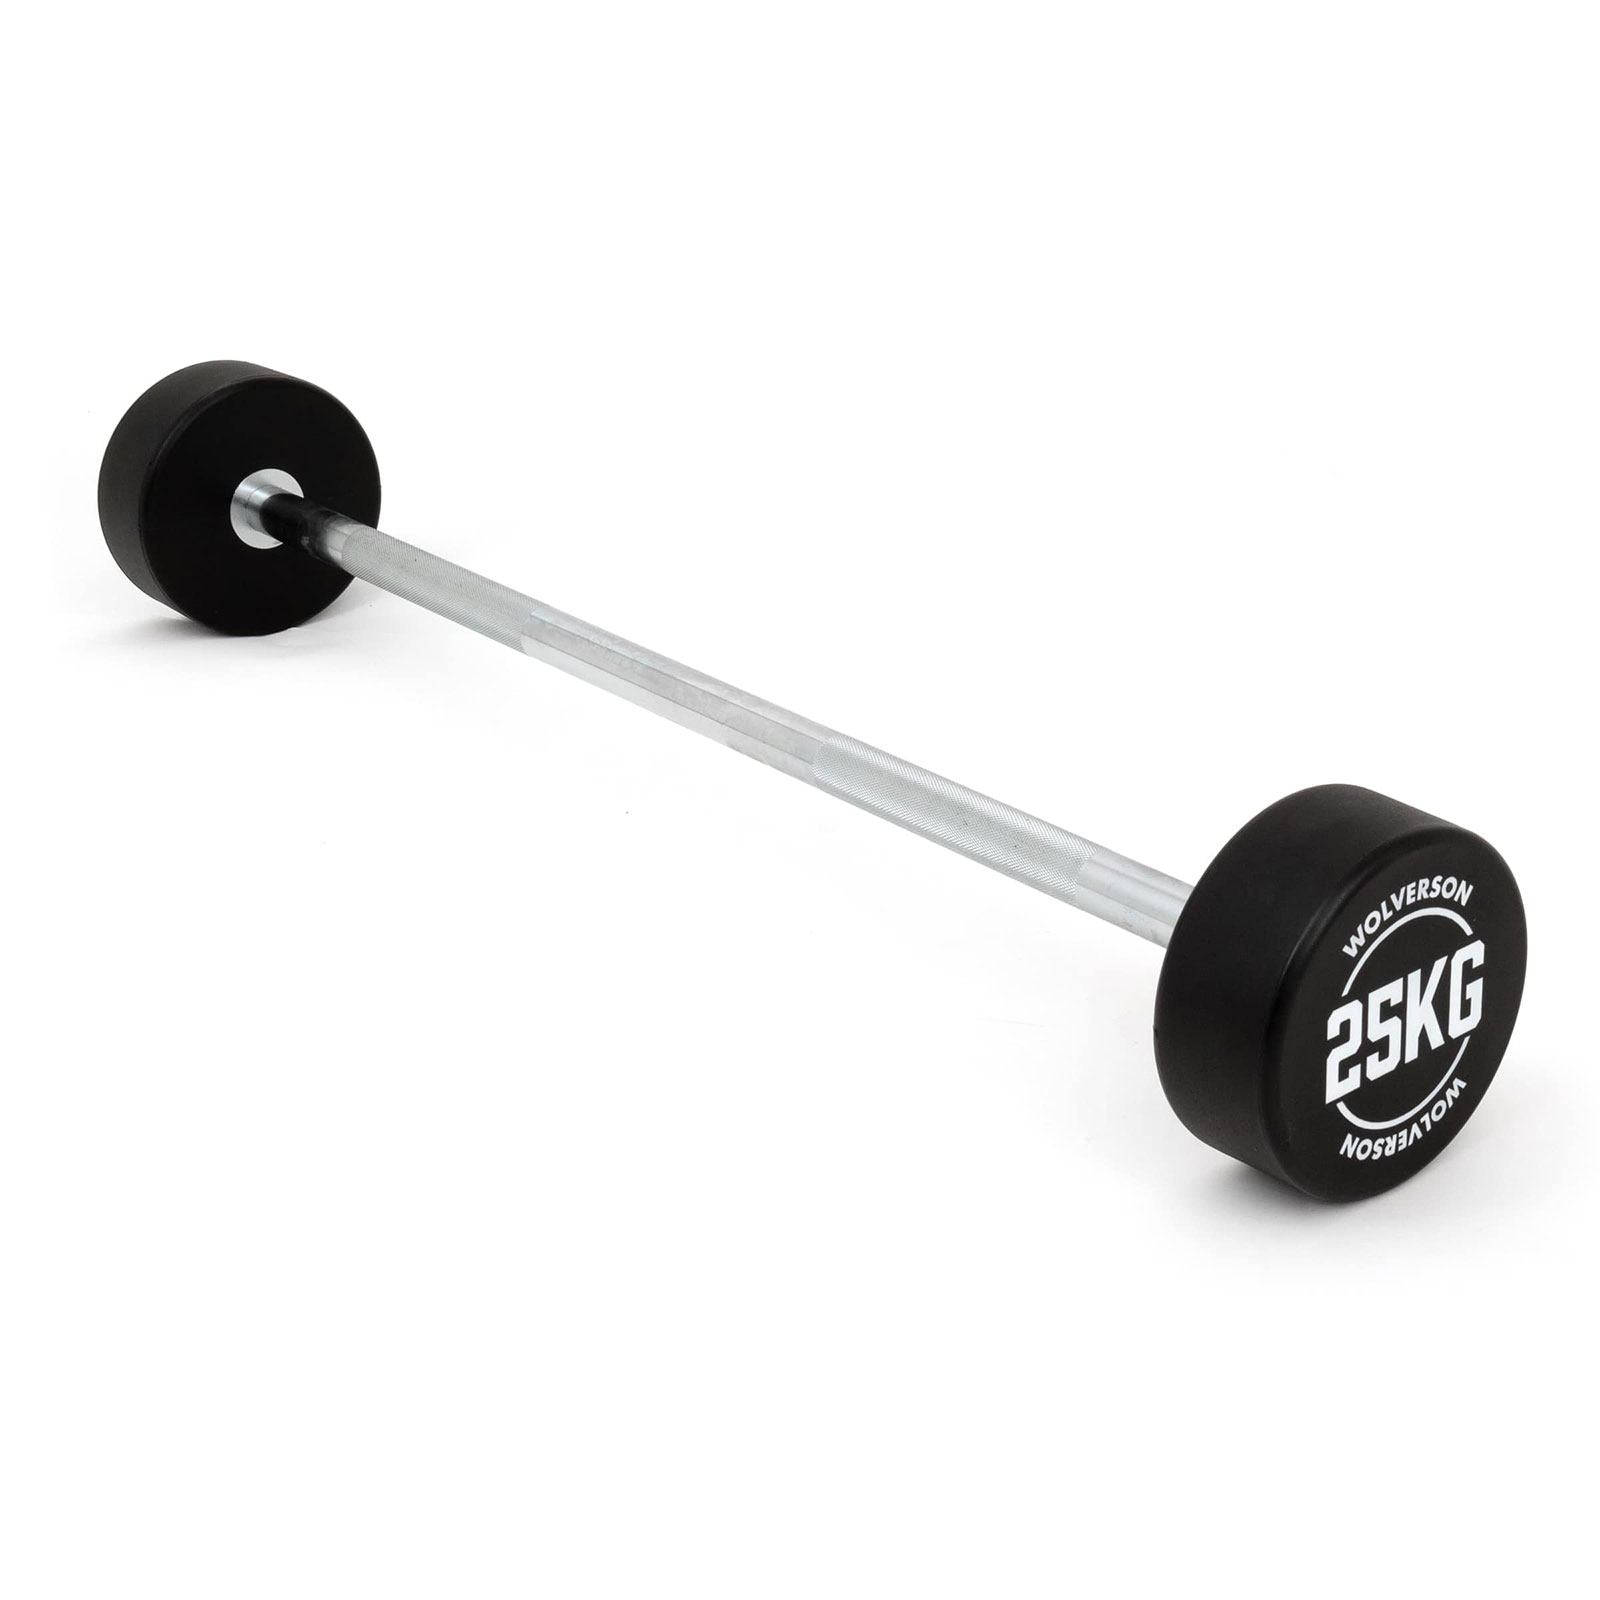 Wolverson PU Fixed Weight Barbells